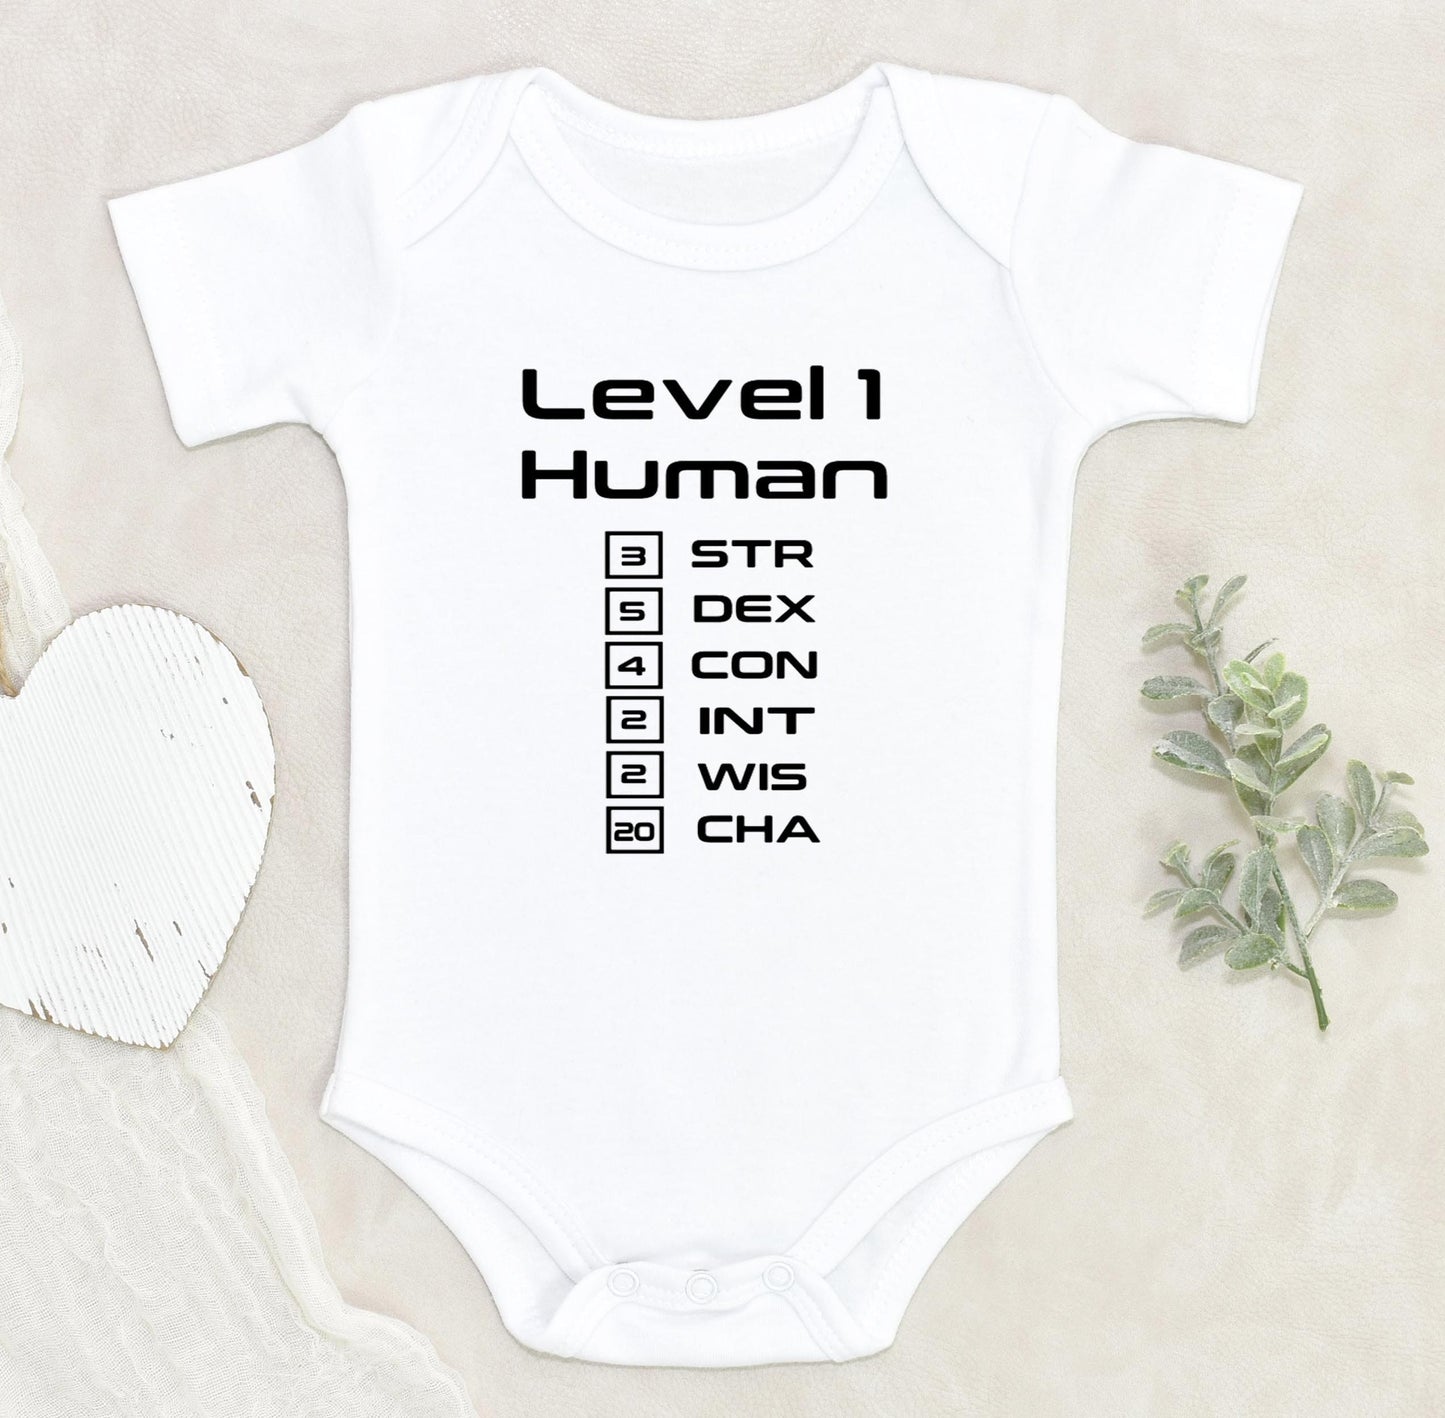 Level 1 Human Bodysuit, Gamer Baby, Dungeons and Dragons, Baby Bodysuit, Custom Bodysuit, Baby Bodysuit, Coming Home Outfit, Baby Shower